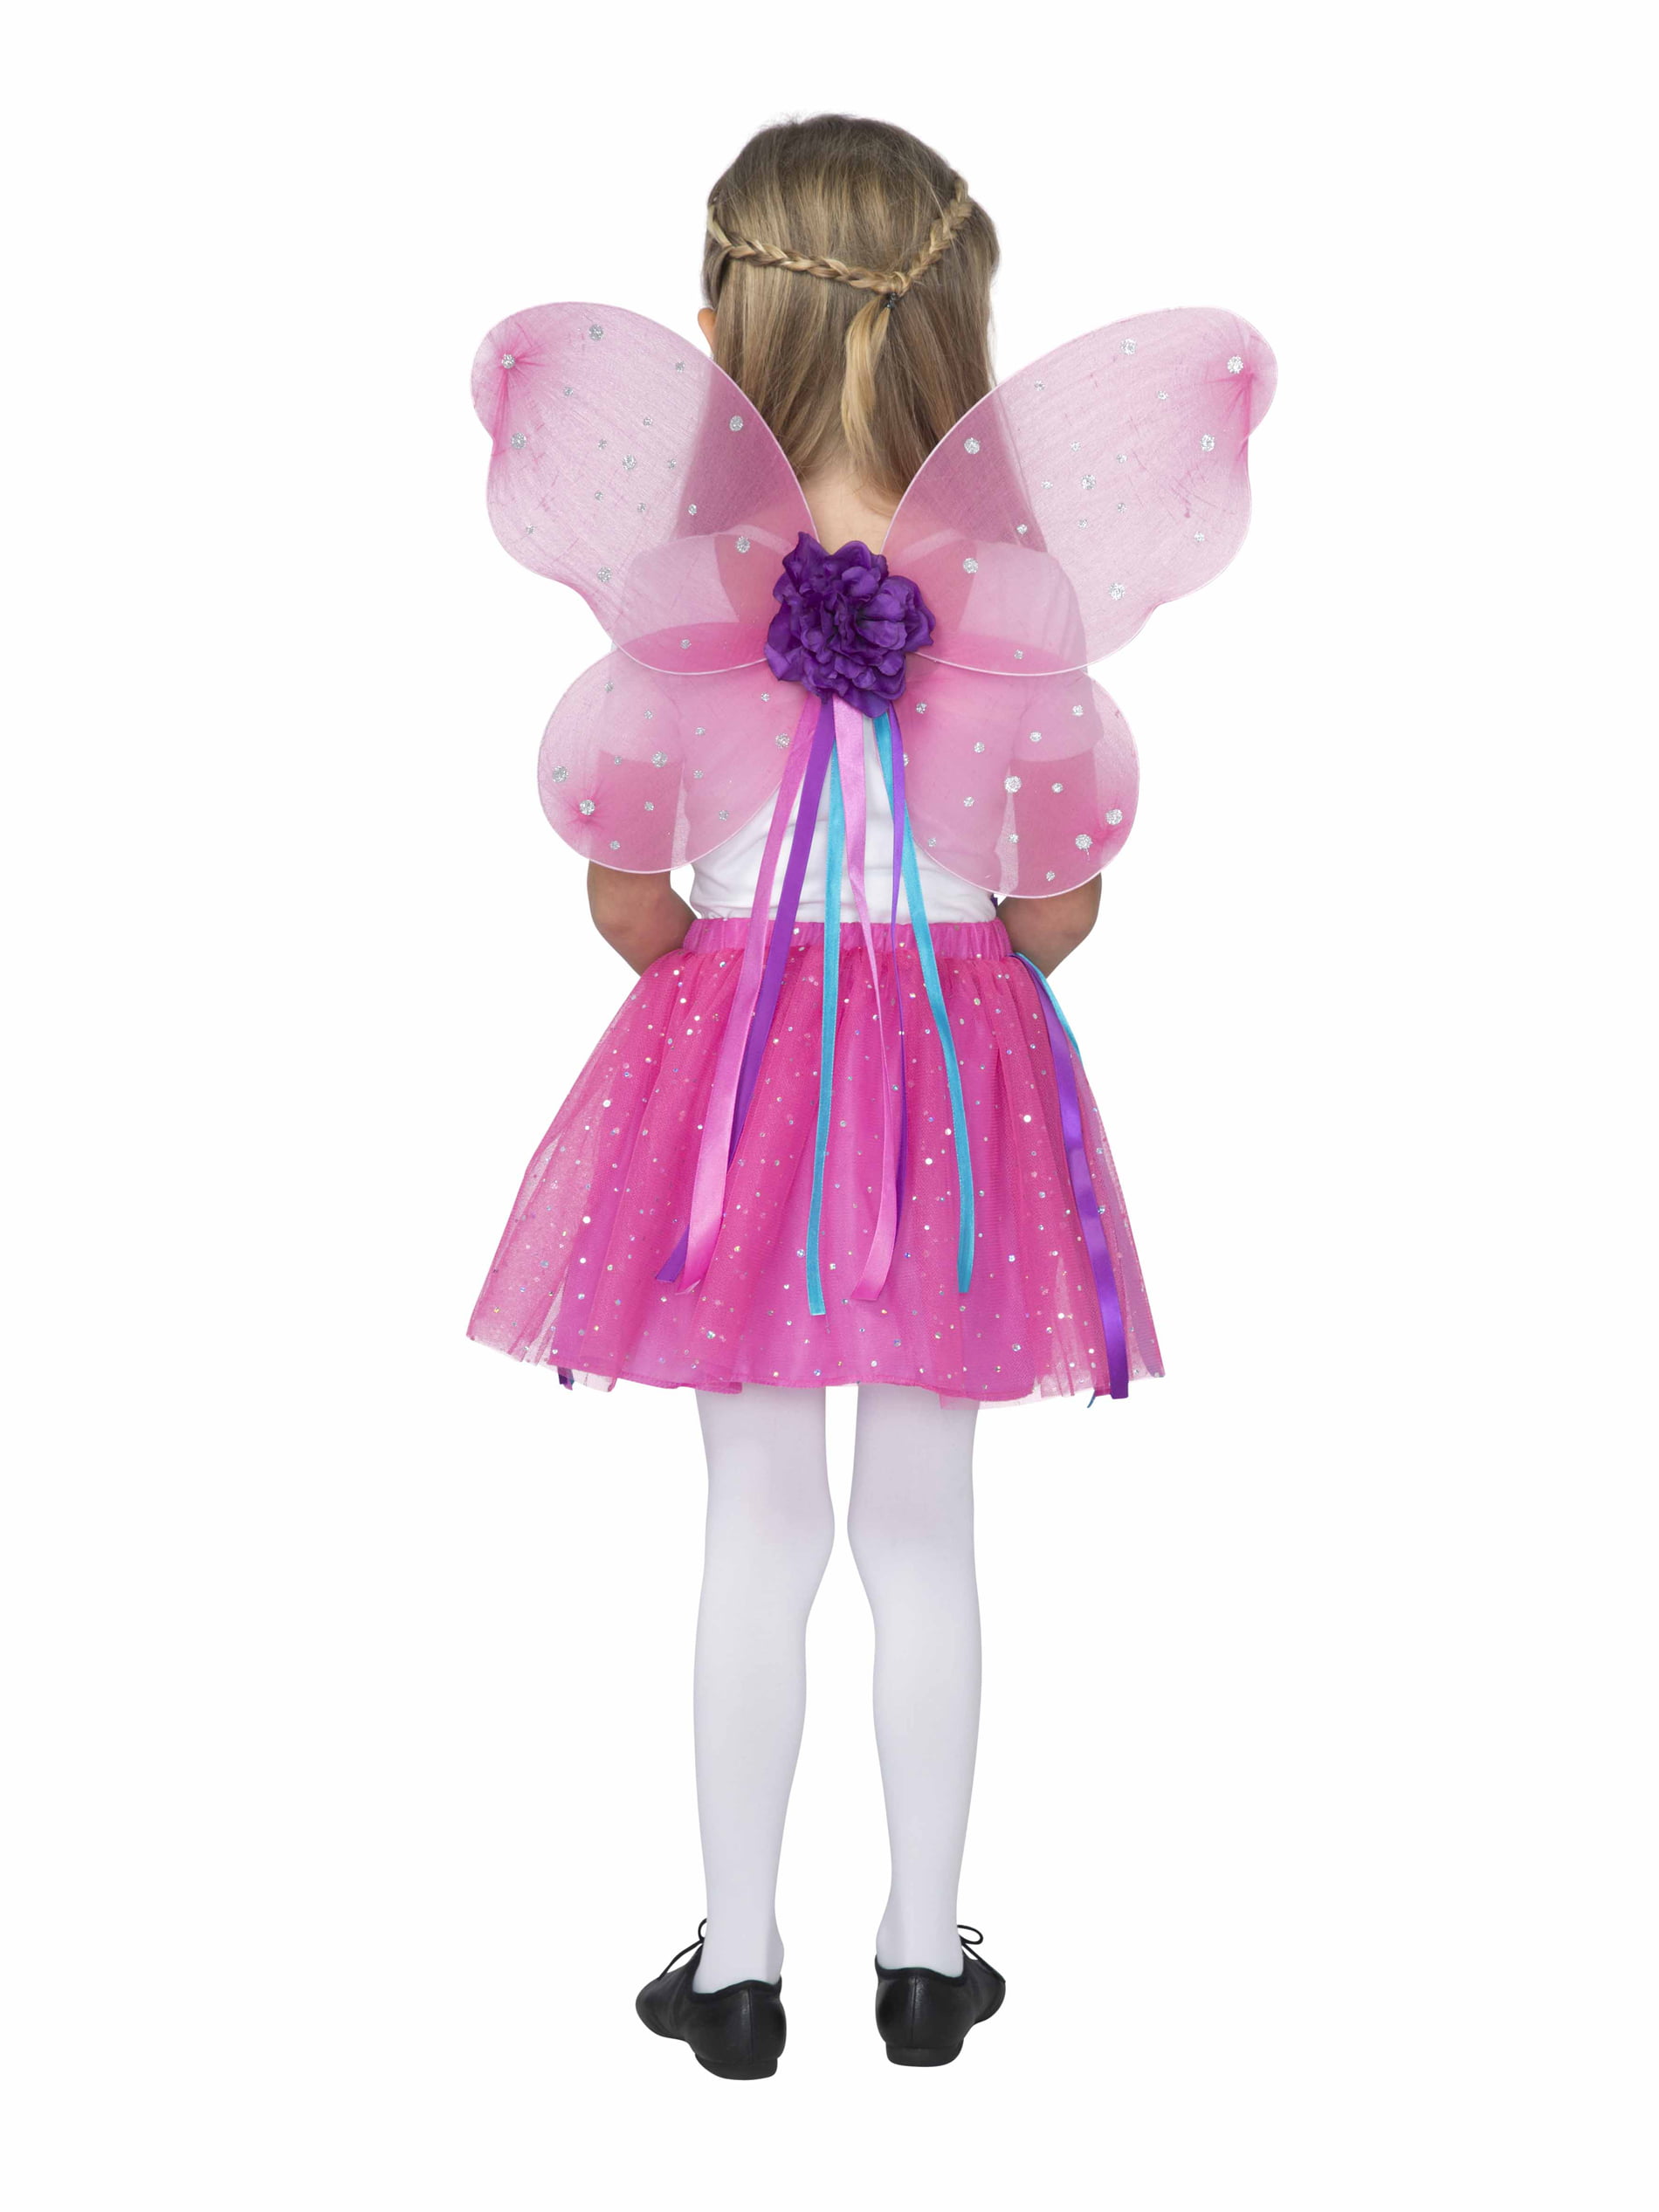 IEFIEL Girls Fairy Princess Dress Up Costume Sparkling Glittery Wings/Fairy Wand 